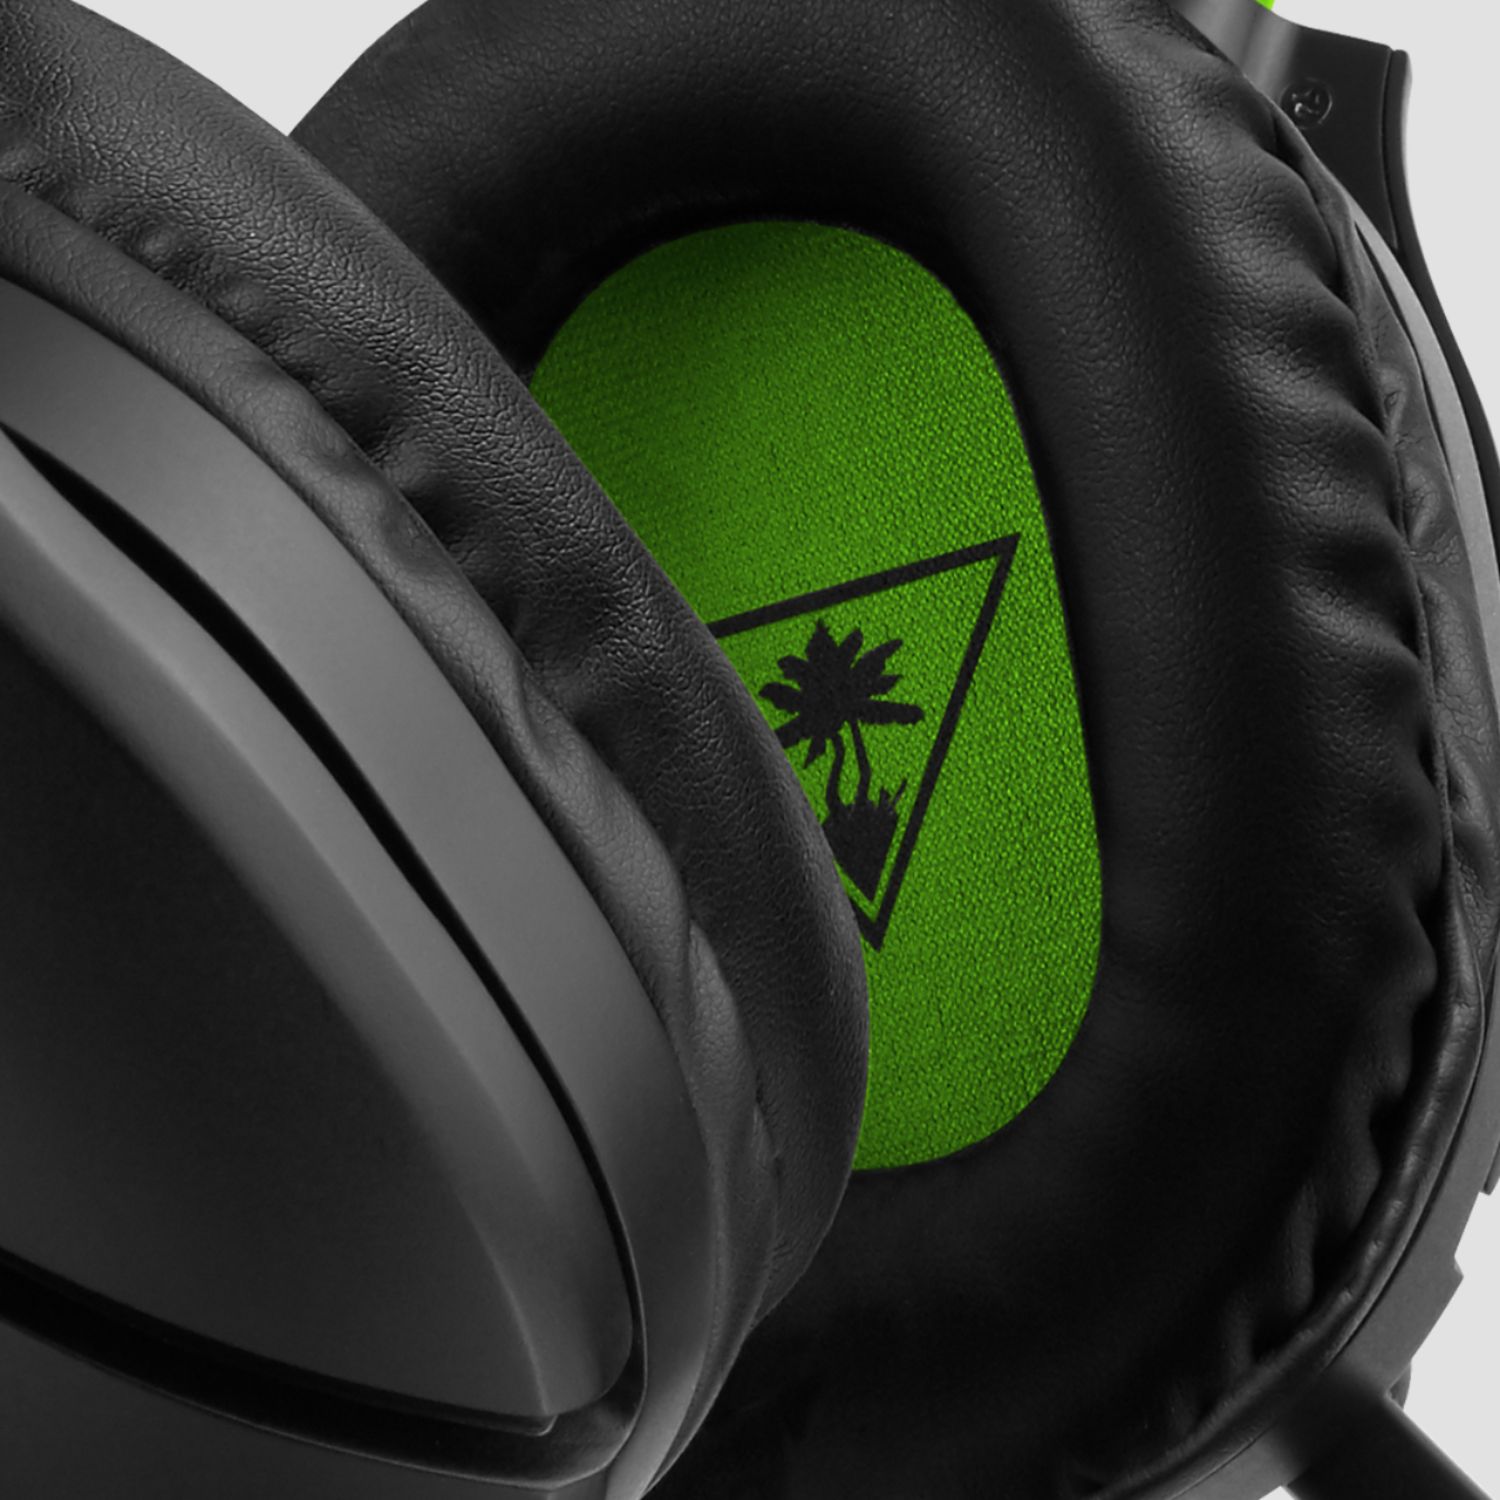 Turtle Beach® Xbox Gamers Pack Featuring Recon™ 70 Headset & Recon